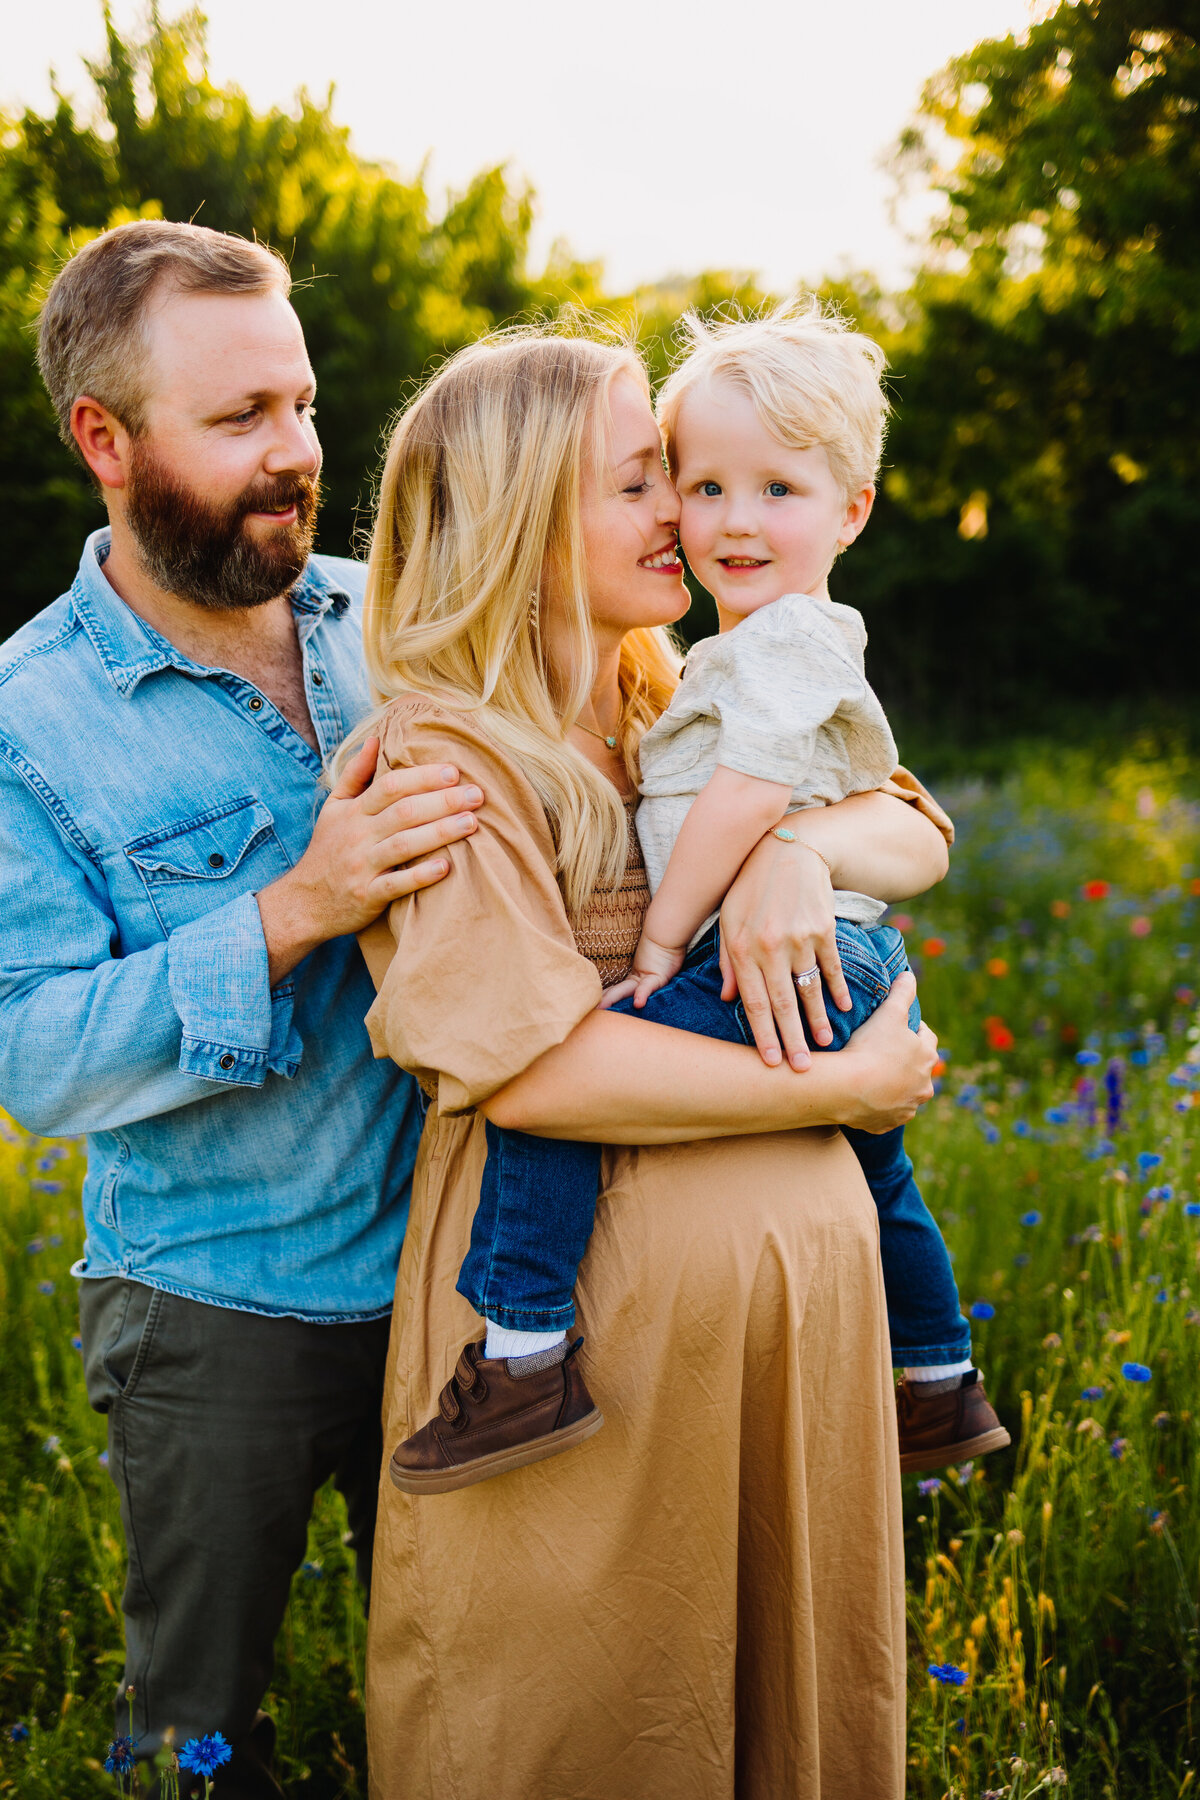 Family photograph in a garden with tall grass and small red flowers. The woman is pregnant and has a long light brown dress, she is holding her son and giving him a kiss on the cheek and he is dressed in a blue jean and a white shirt. The man has a beard and is looking at the woman in a blue outfit.